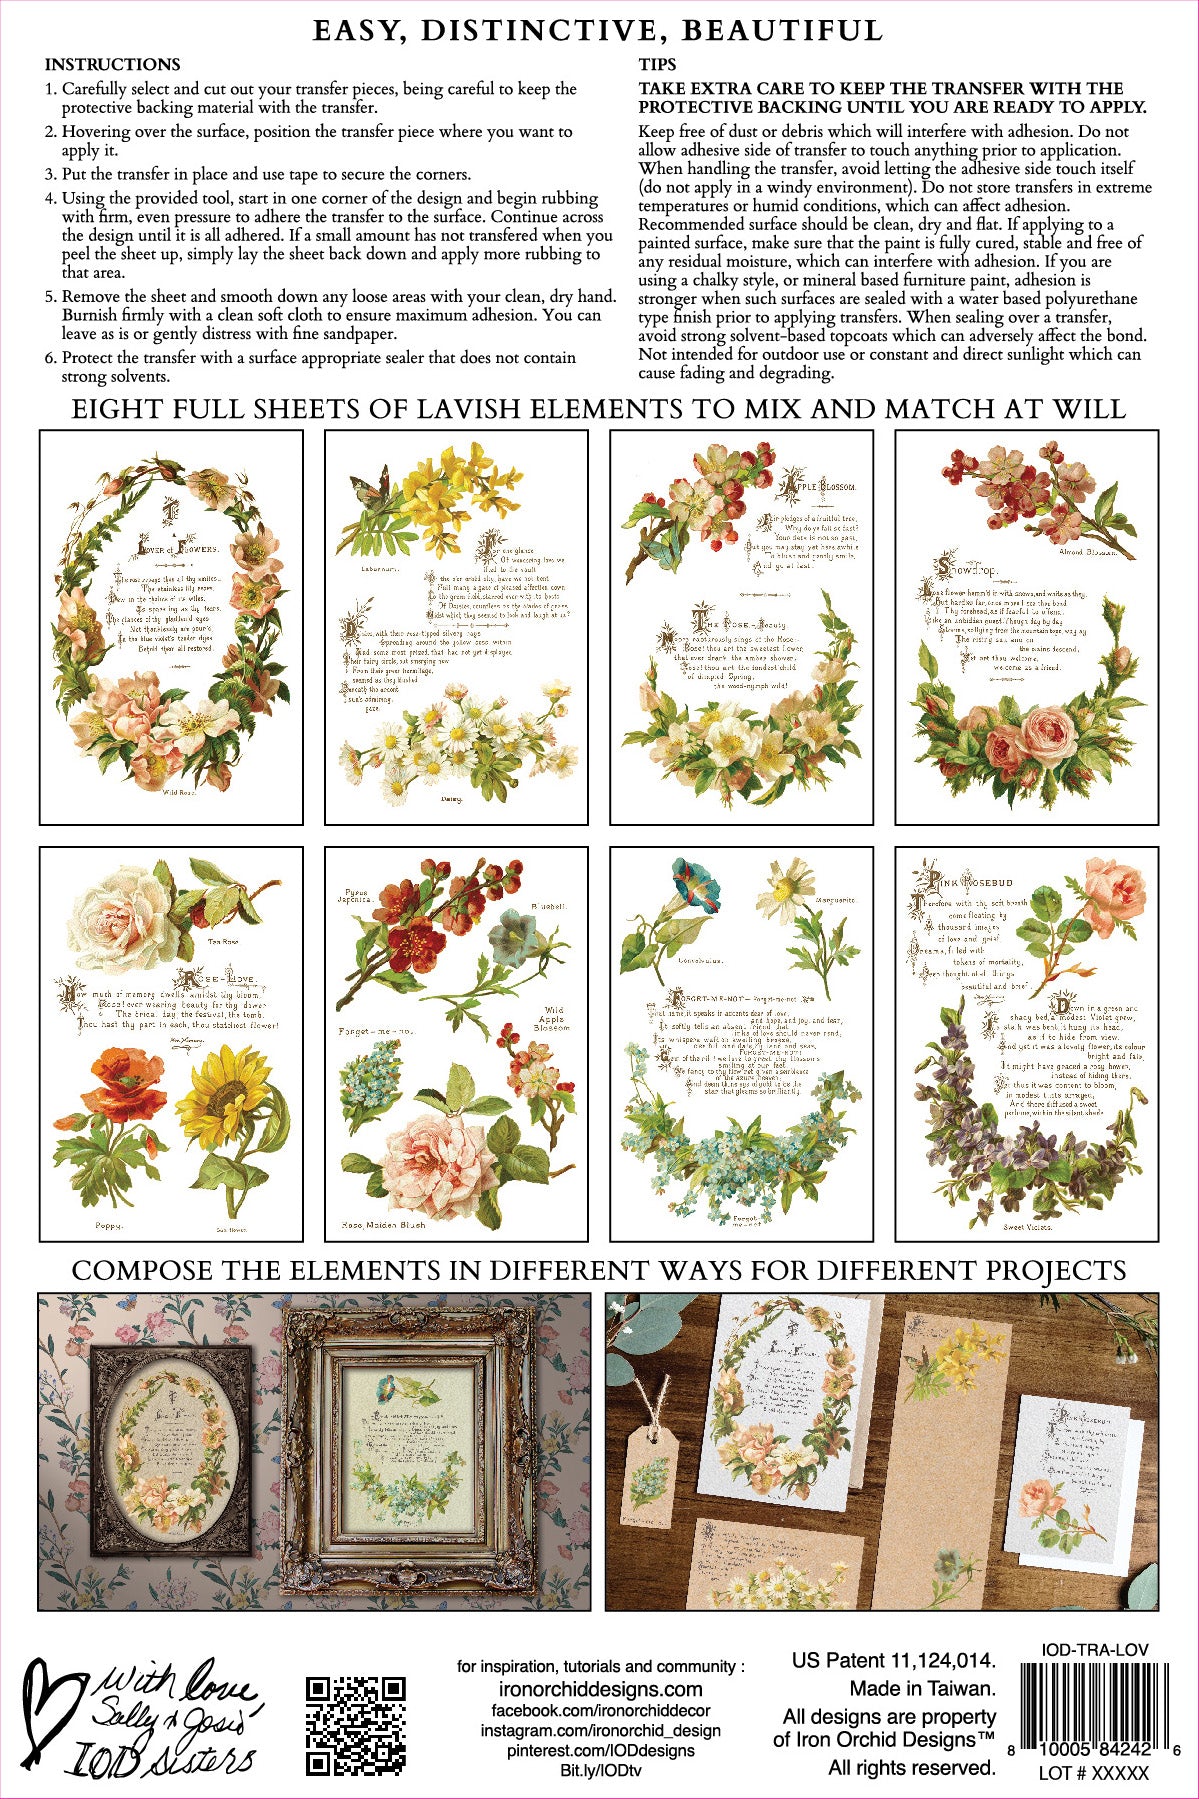 LOVER OF FLOWERS IOD TRANSFER (8″X12″ PAD-8 SHEETS )---------NEW 2024